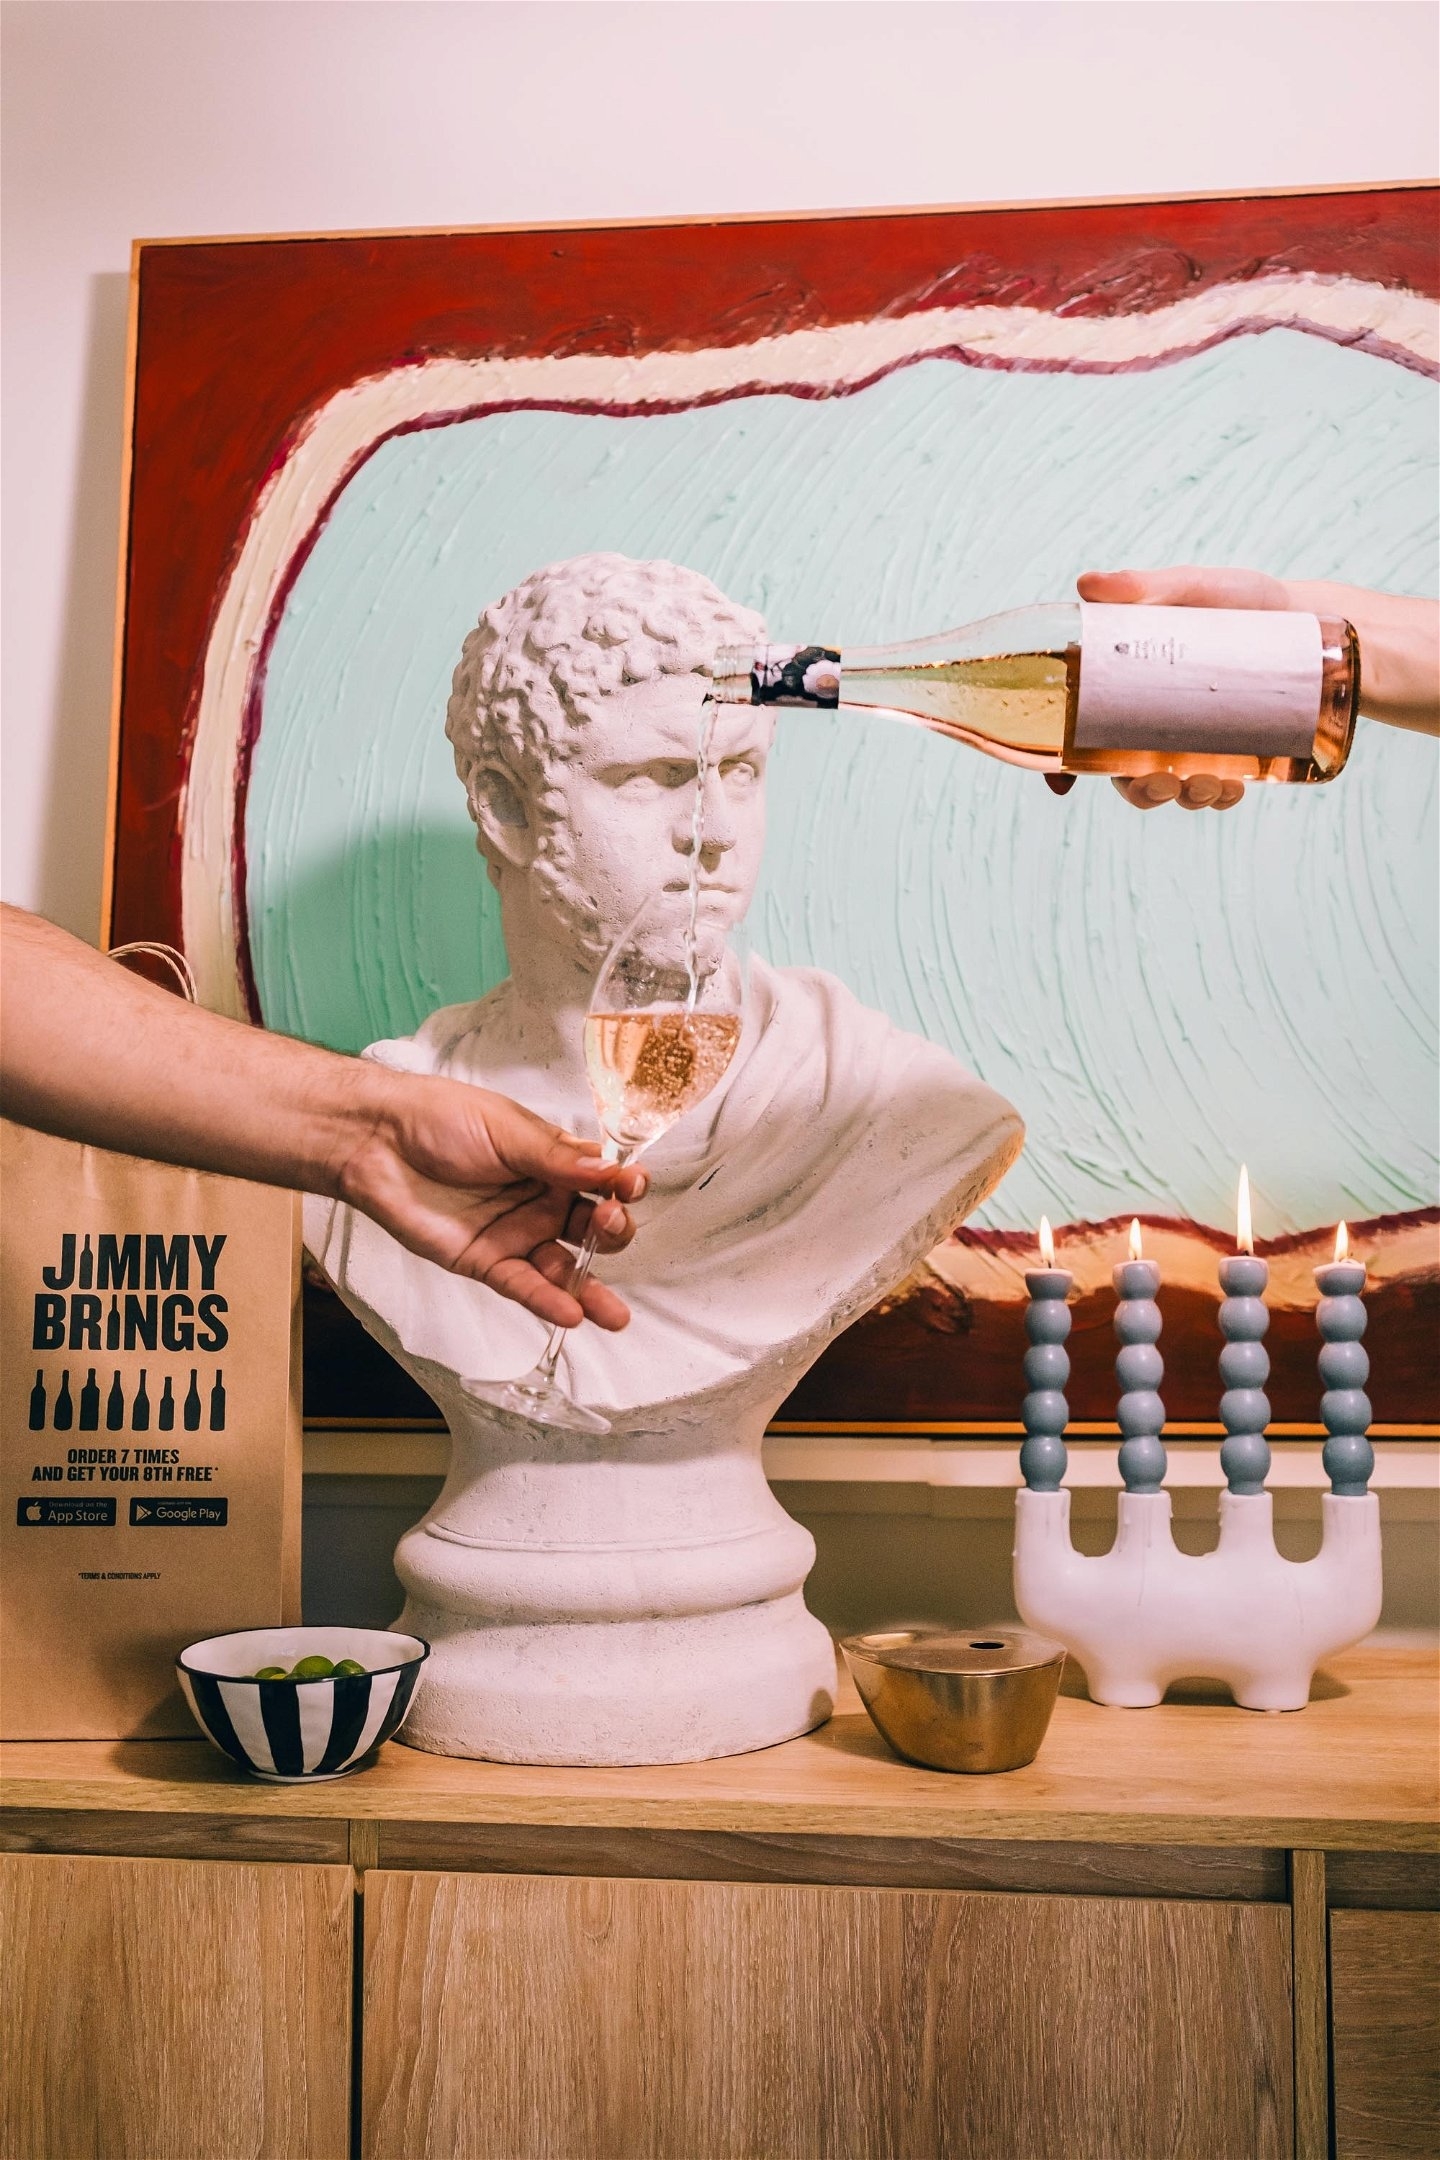 Person pours sparkling wine from a bottle into a glass held by a bust sculpture, with candles and a book nearby